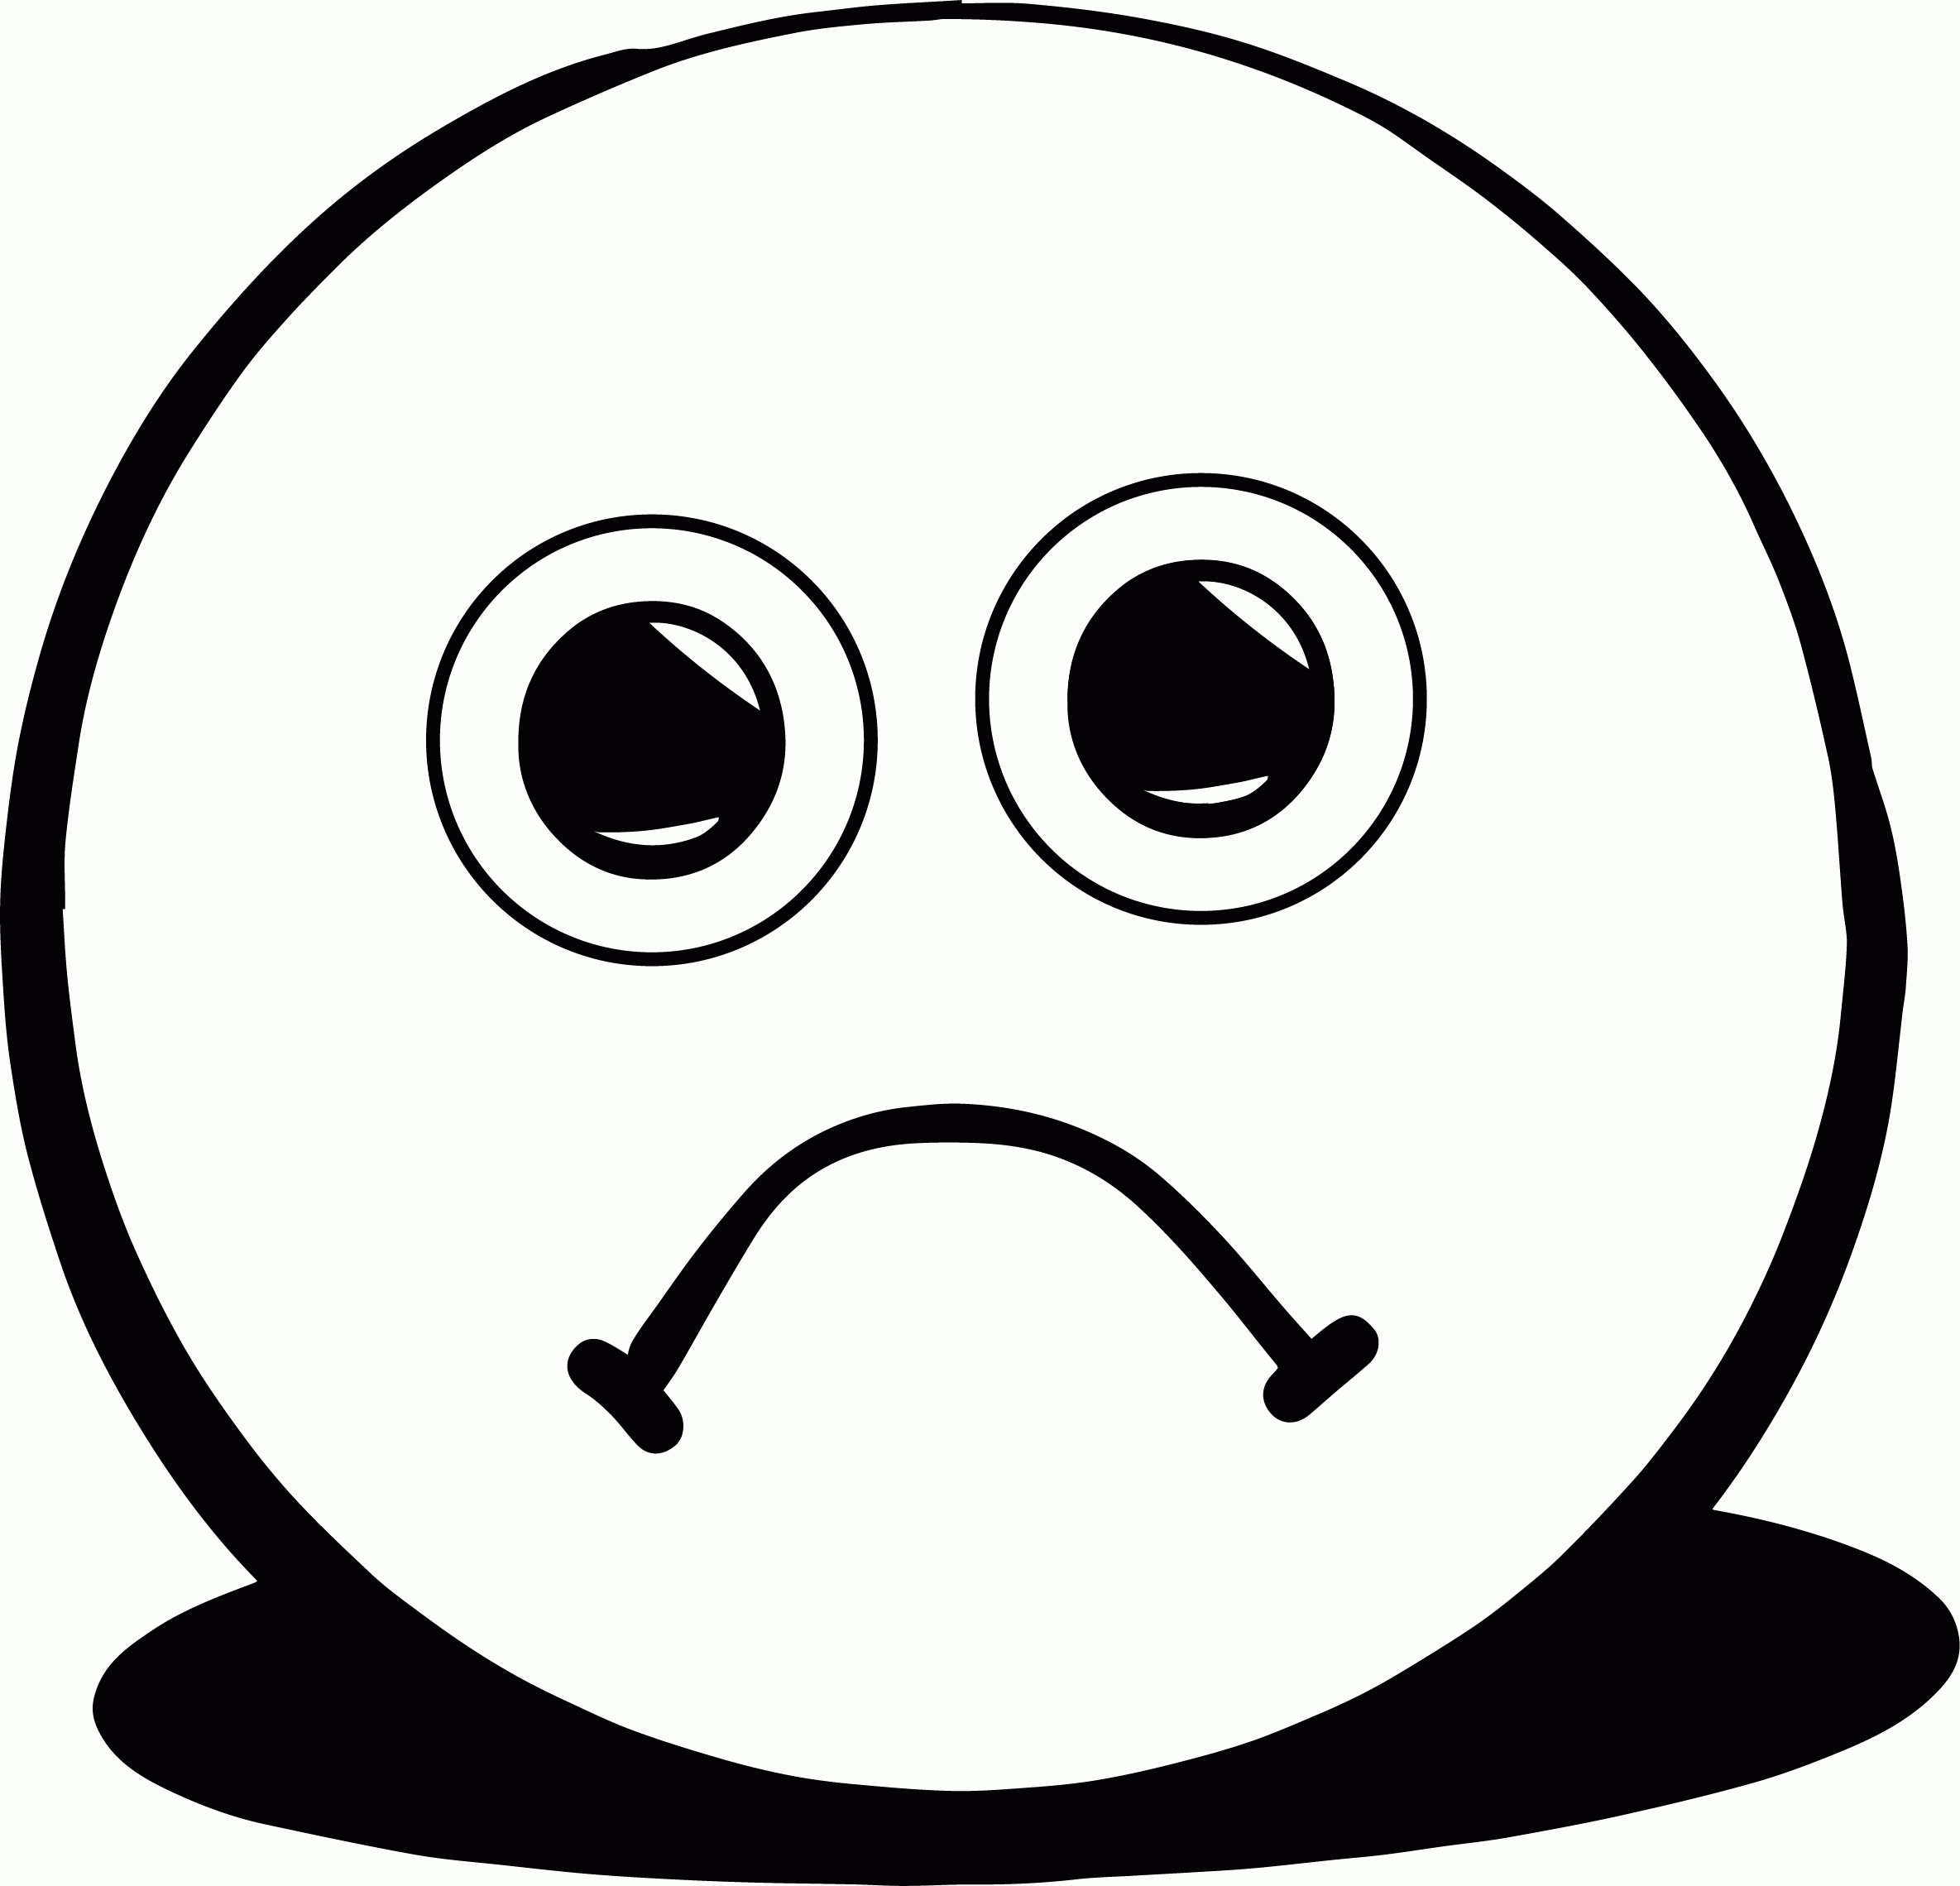 Coloring Page Of A Sad Face - AZ Coloring Pages